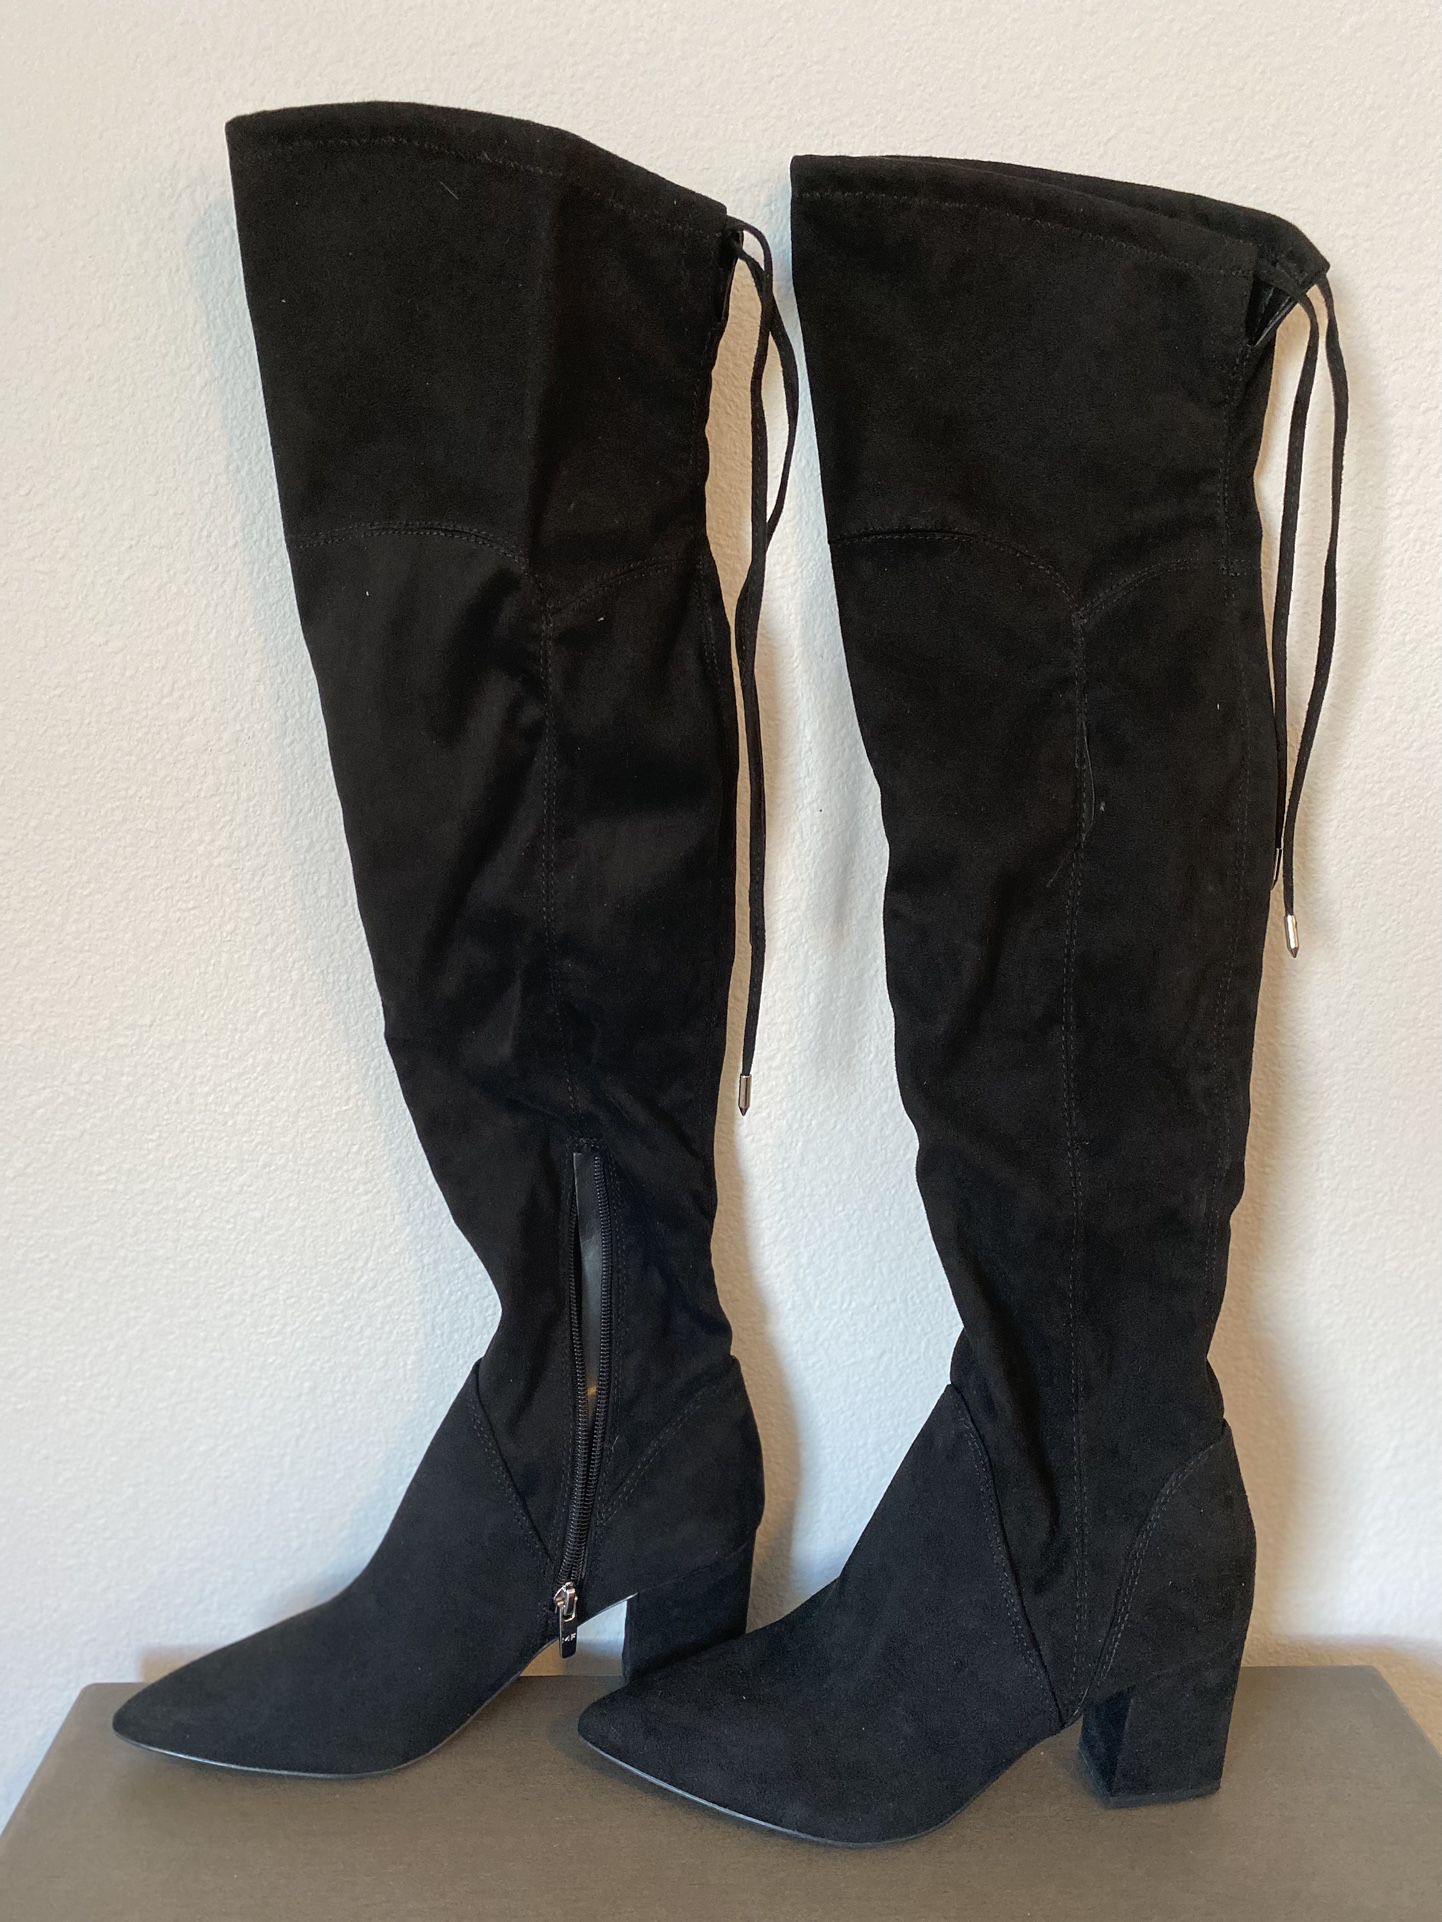 Marc Fisher Thigh High Boots